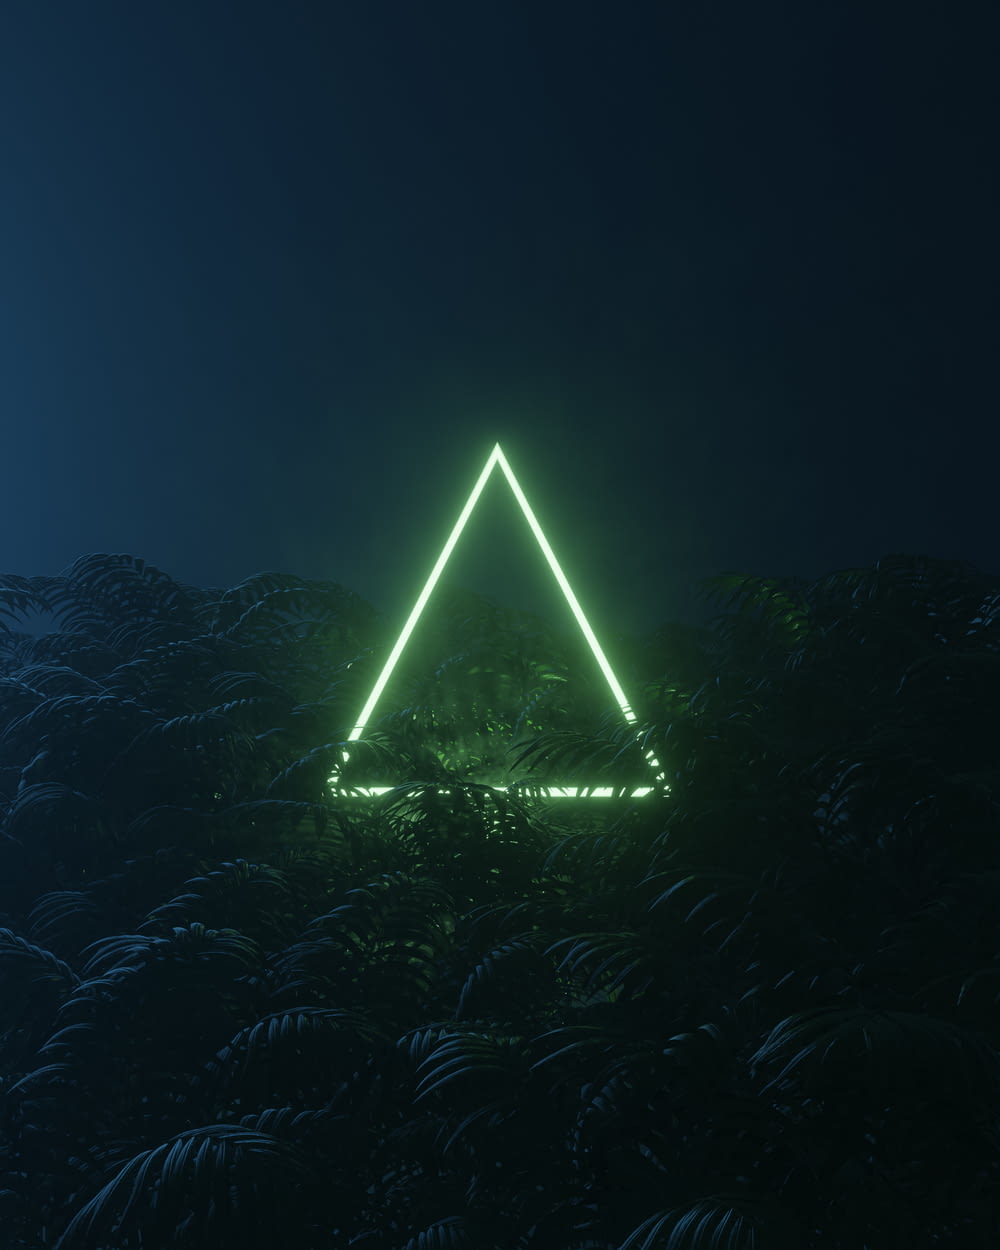 a pyramid with lights at night